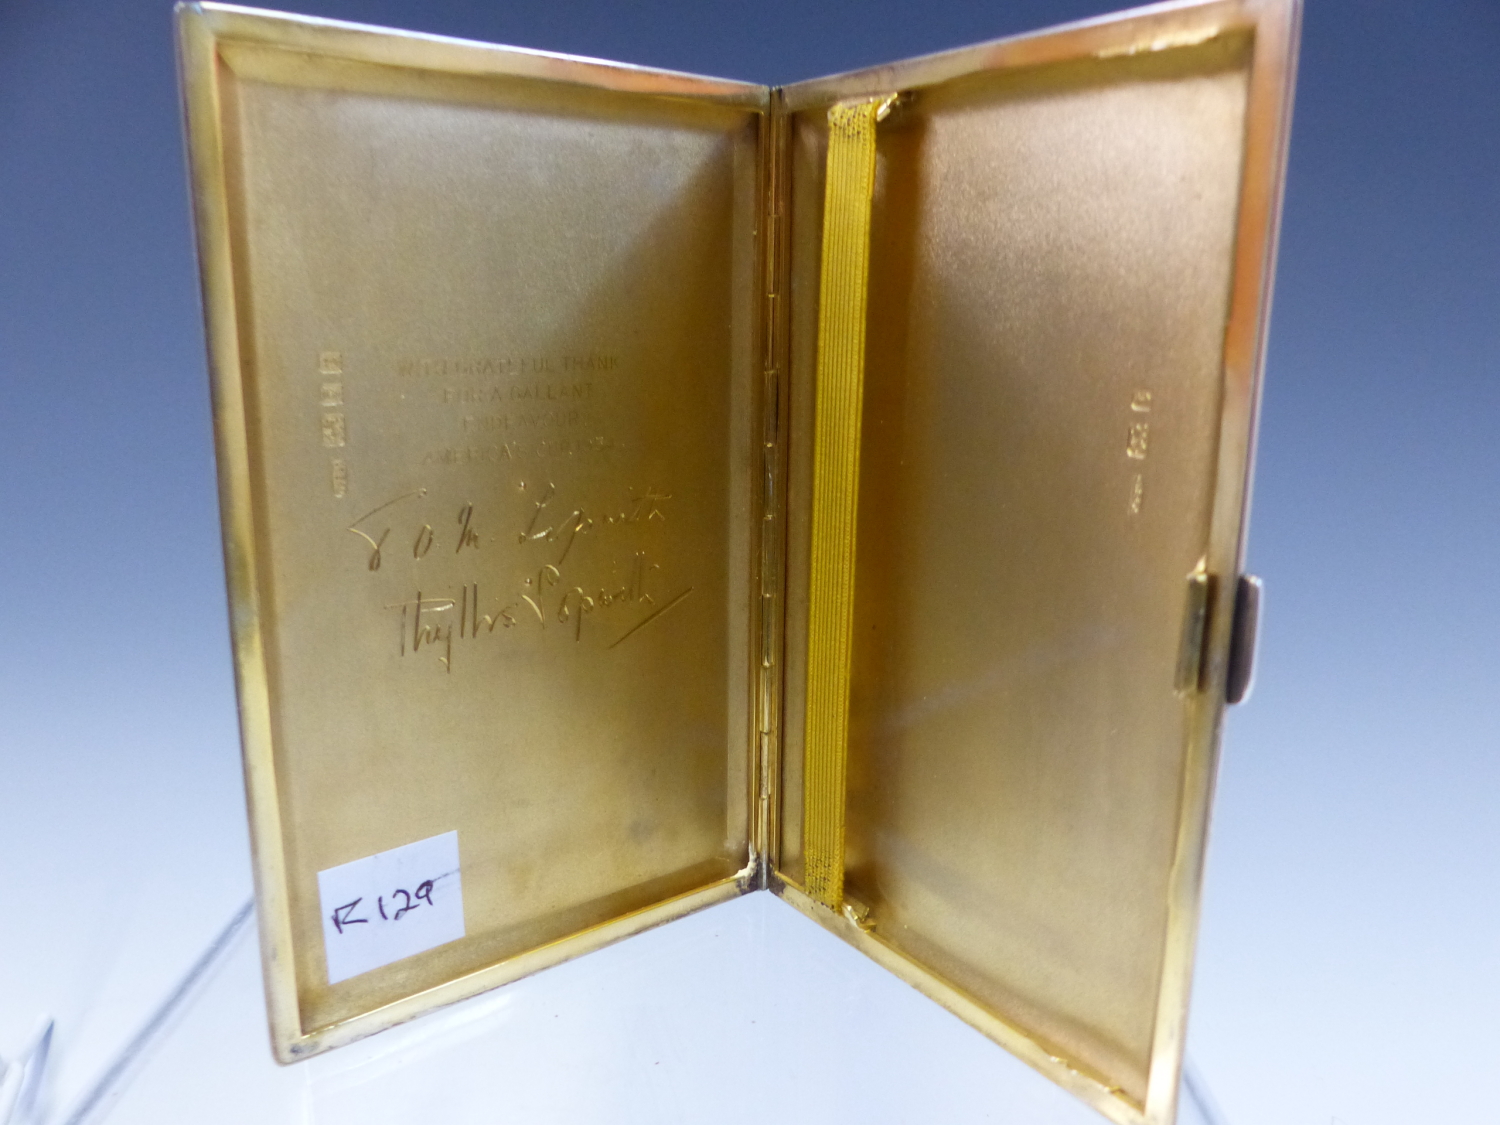 1934 AMERICAS CUP INTEREST, A GIFT SILVER CIGARETTE CASE BY PAGET AND BRAHAM, LONDON 1934, TO GERALD - Image 3 of 7